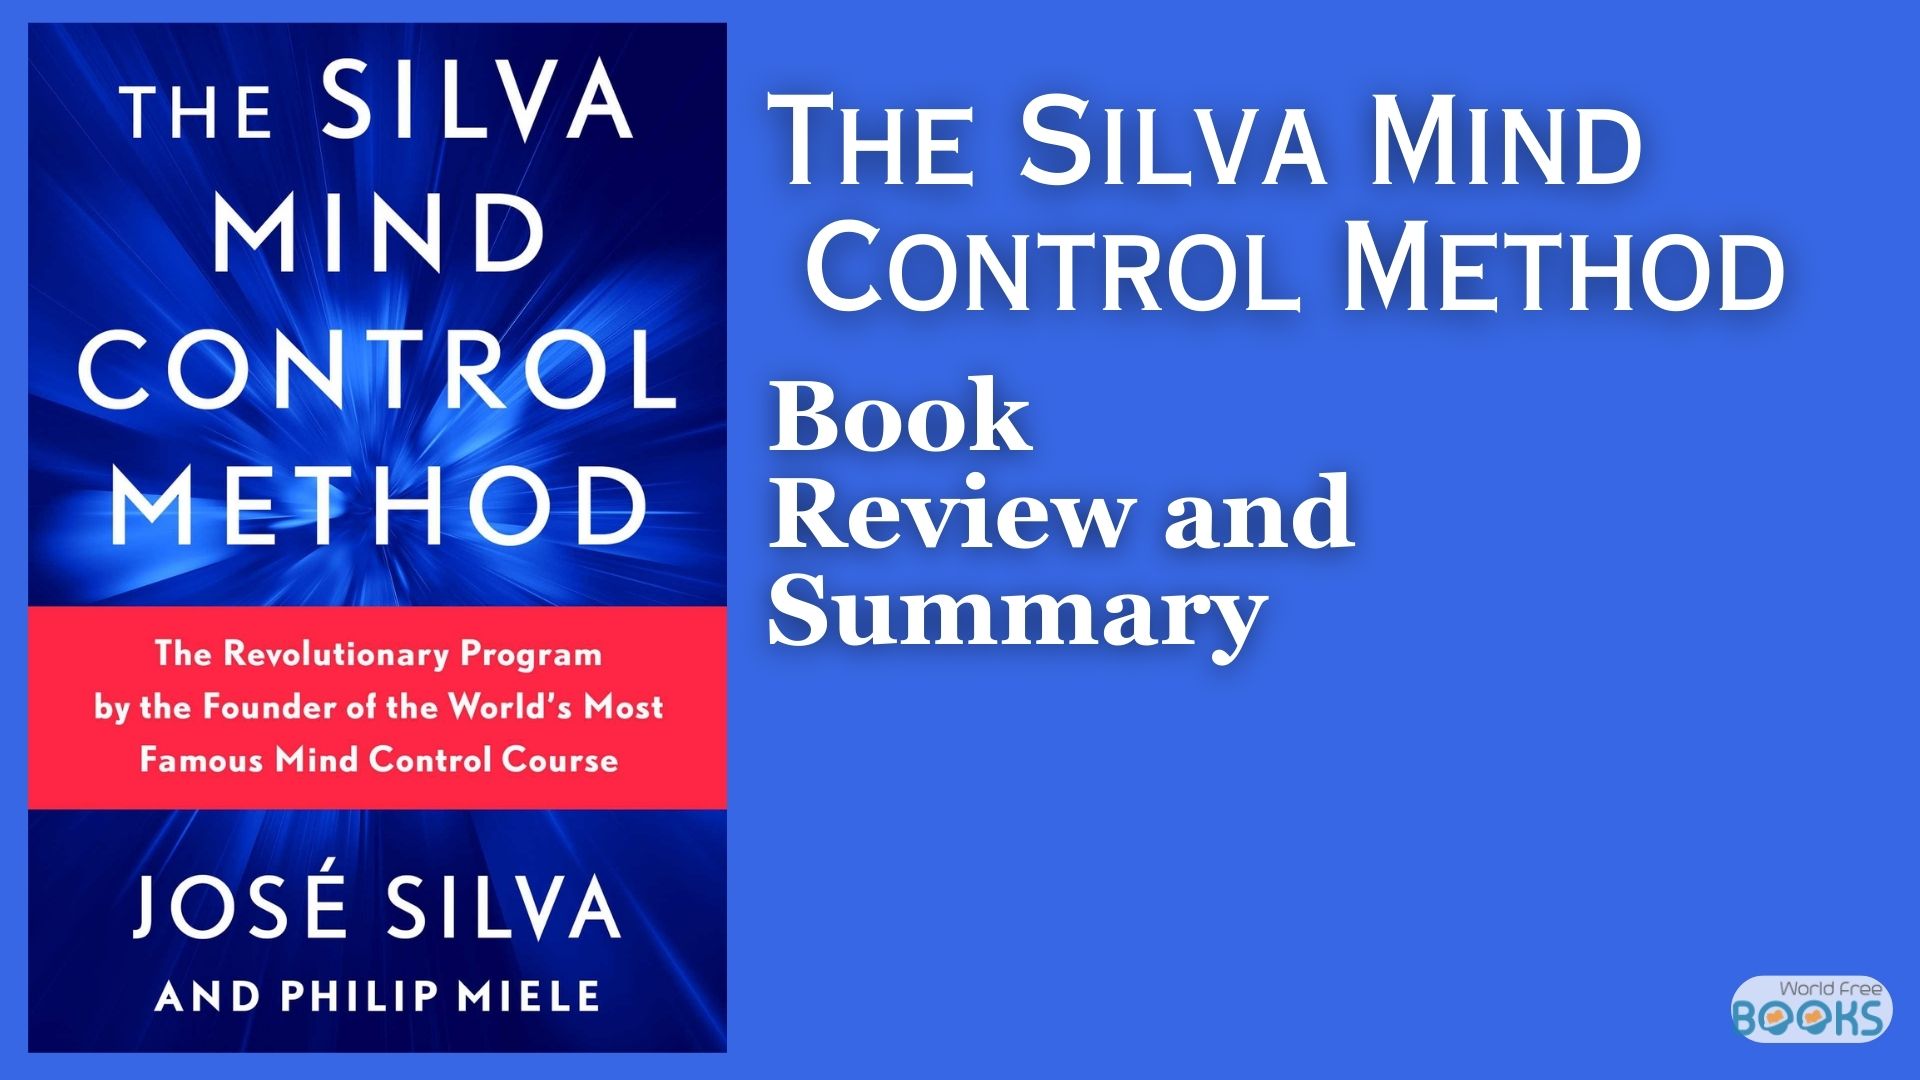 The Silva Mind Control Method By Jose Silva Book Review and Summary